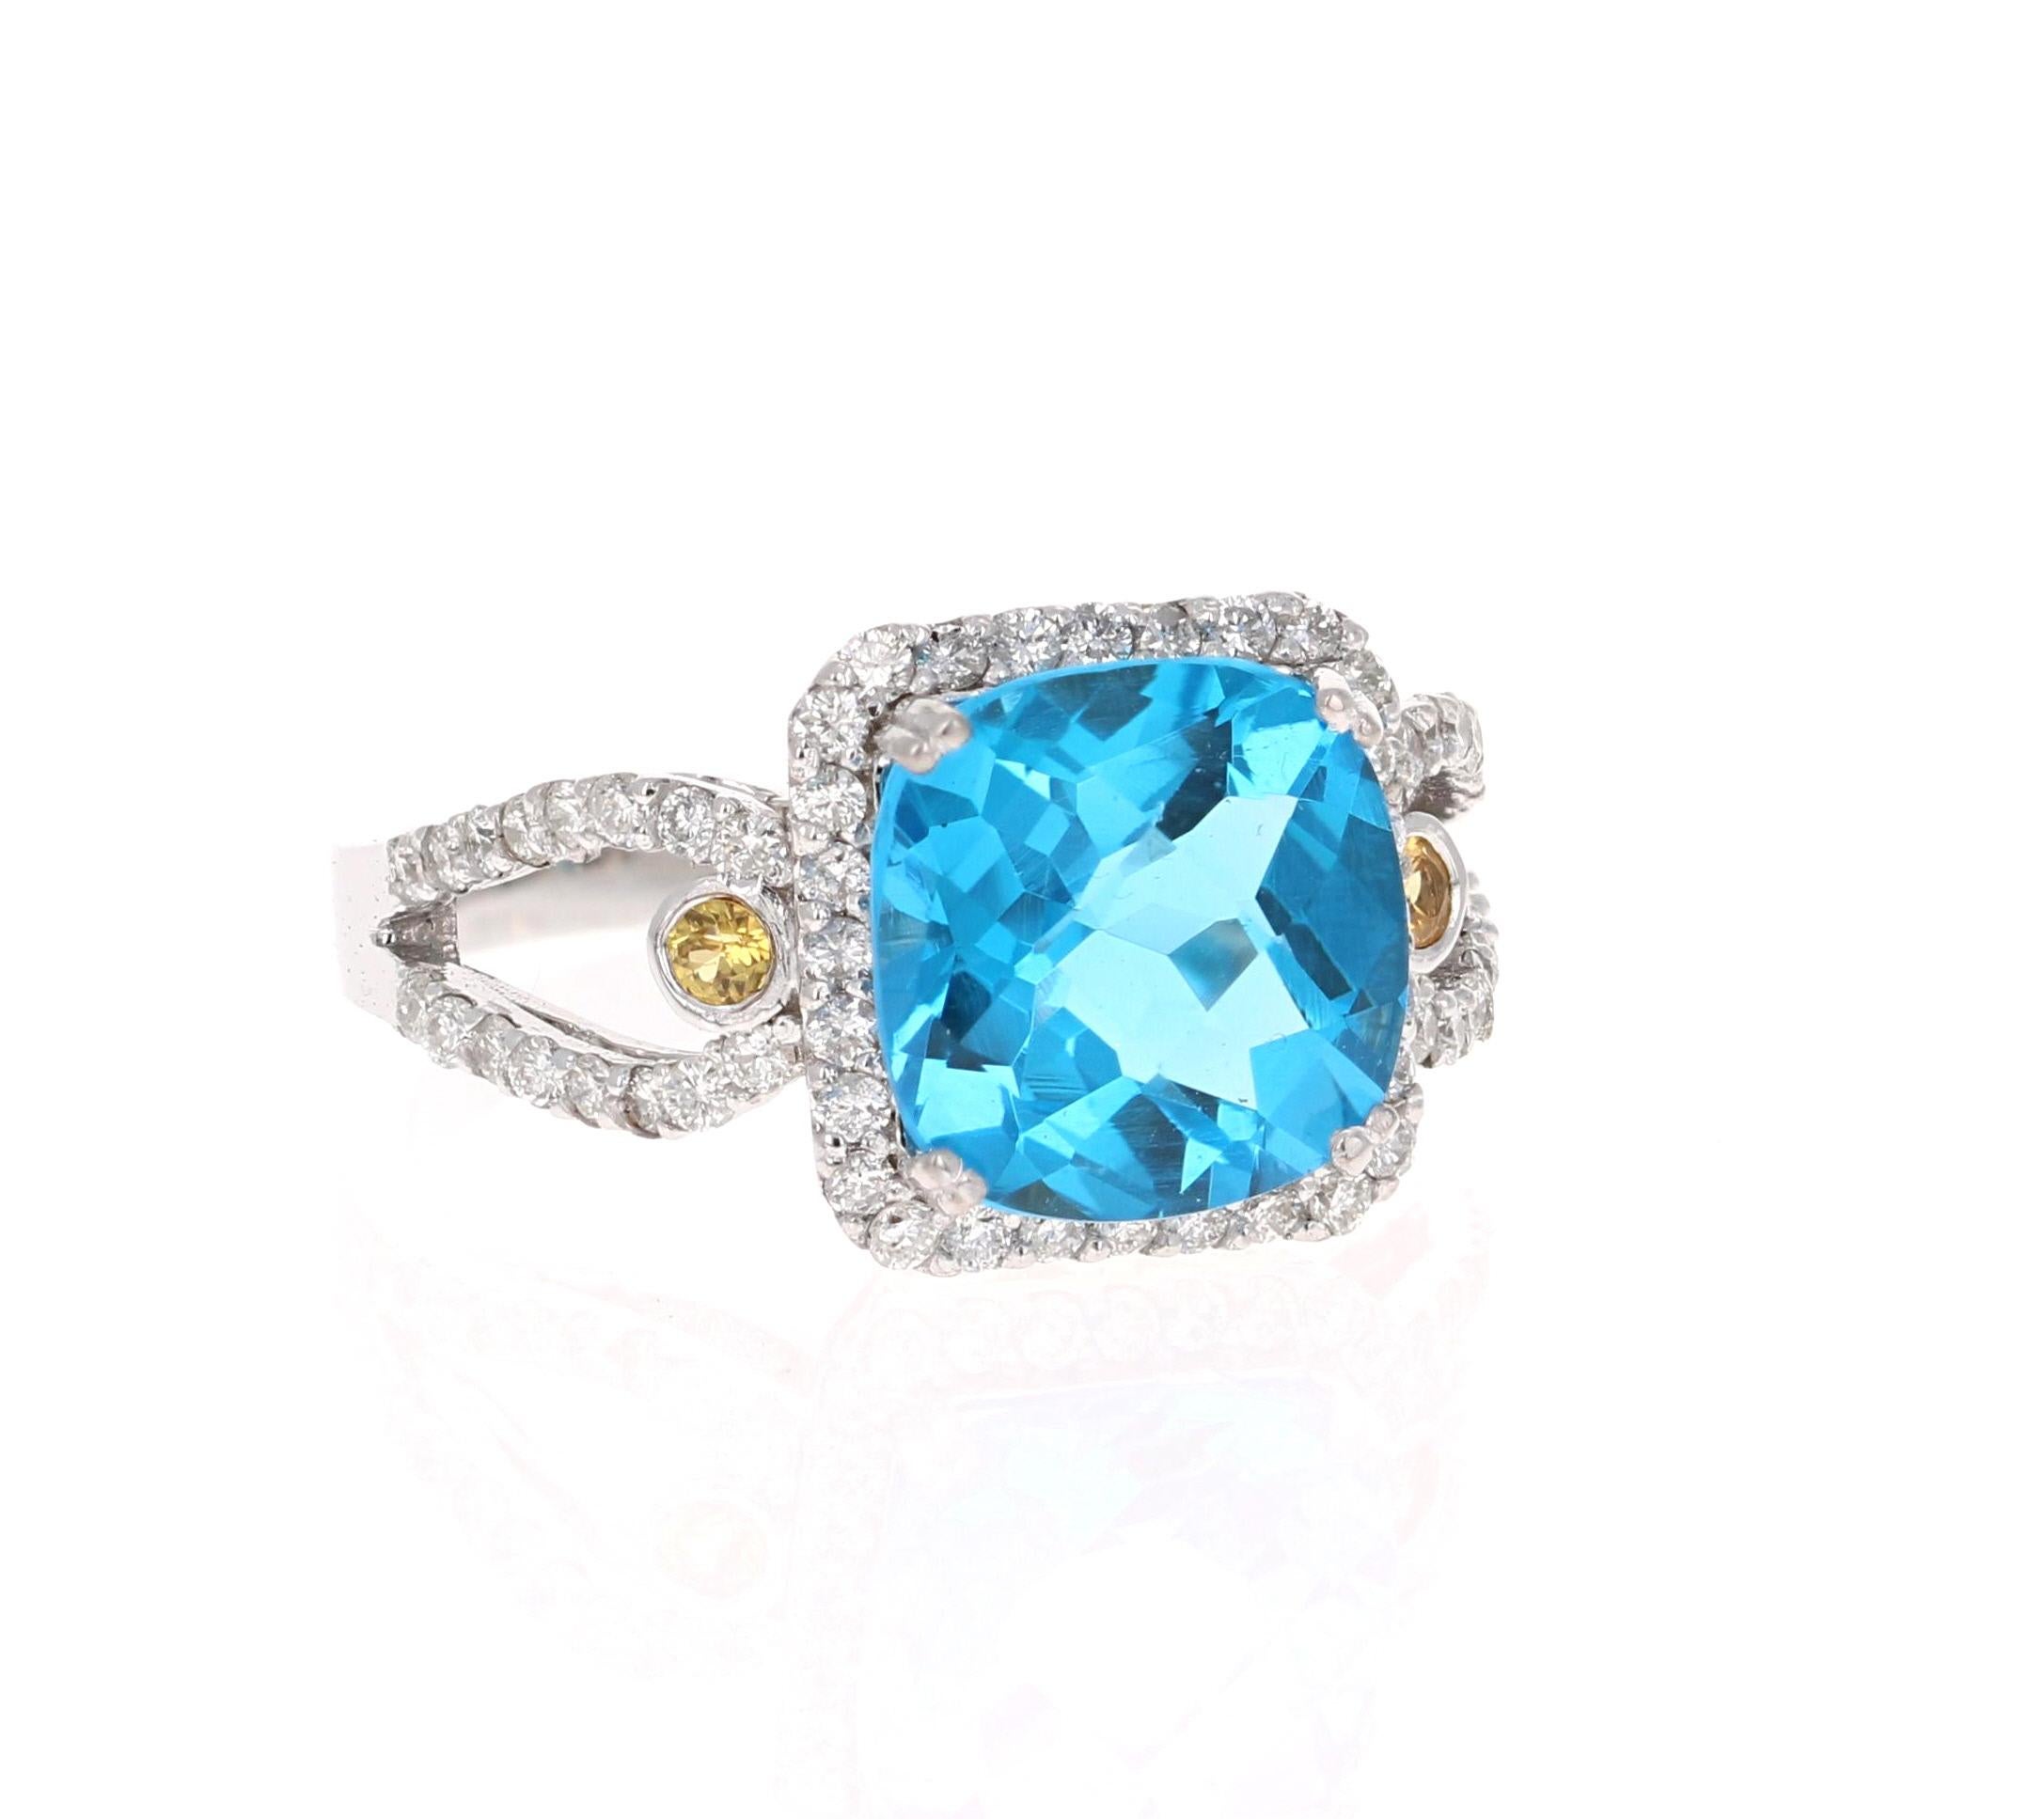 This beautiful Cushion Cut Blue Topaz and Diamond ring has a stunningly vibrant Blue Topaz that weighs 3.97 Carats. It is surrounded by a Halo of 60 Round Cut Diamonds that weigh 0.55 Carats and has 2 Yellow Sapphire accents on the shank that weigh